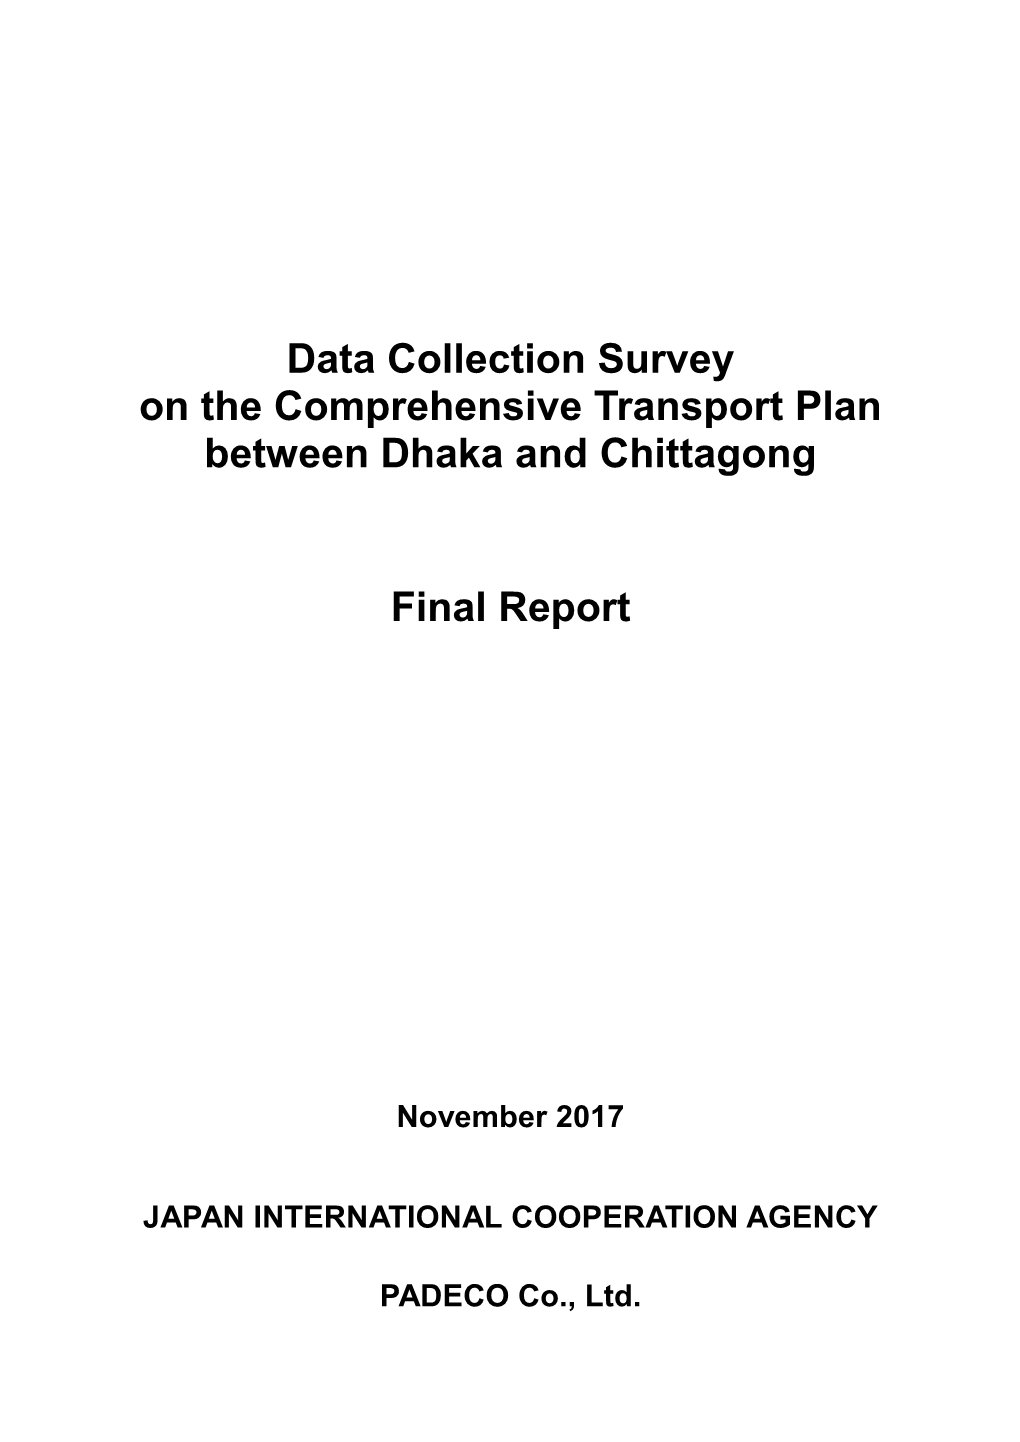 Data Collection Survey on the Comprehensive Transport Plan Between Dhaka and Chittagong Final Report